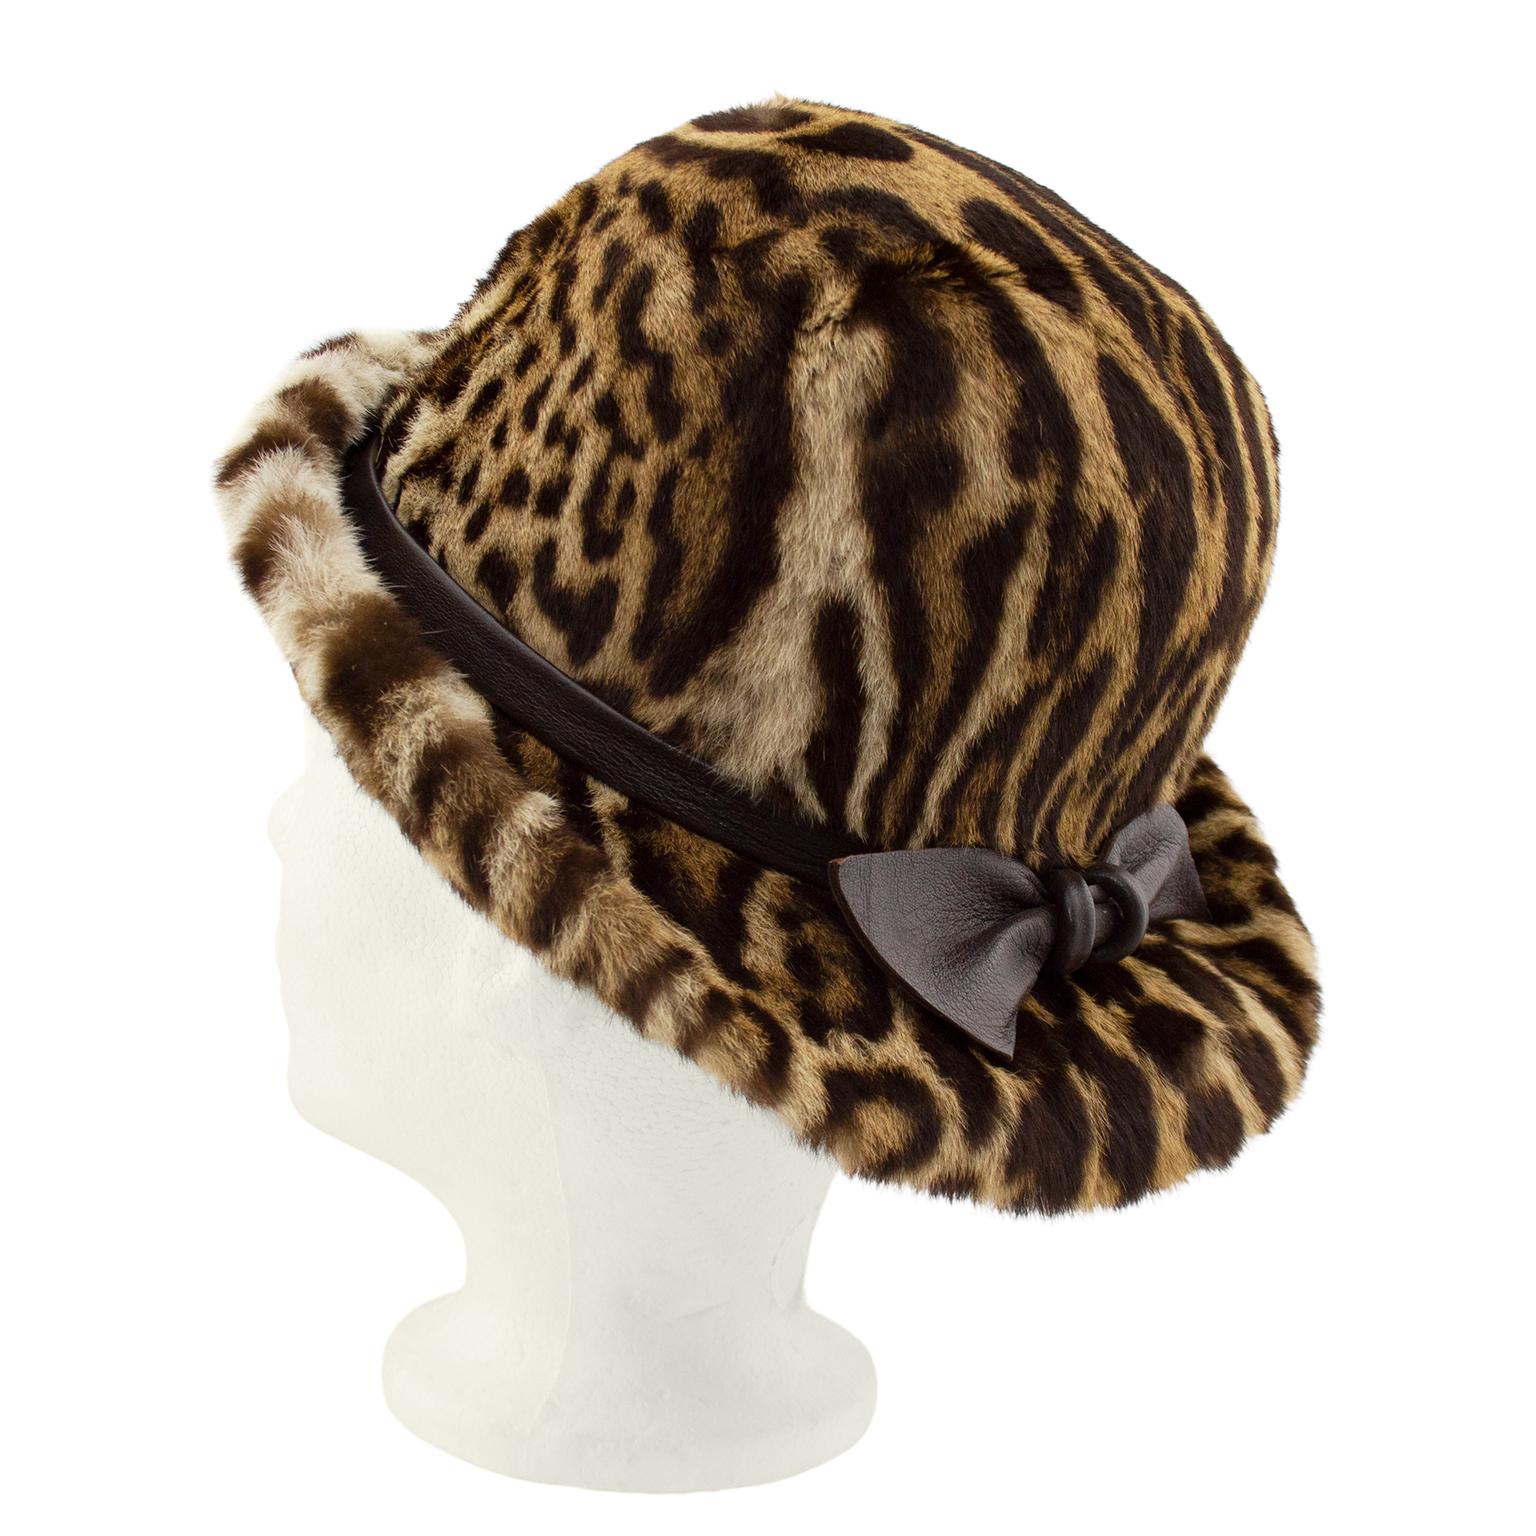 Beautiful 1950s stencil faux leopard print bowler style hat with brown leather bow. Brown silk lining. Made in Toronto, Canada. Excellent vintage condition. Fits small. Can be worn brim up or down.